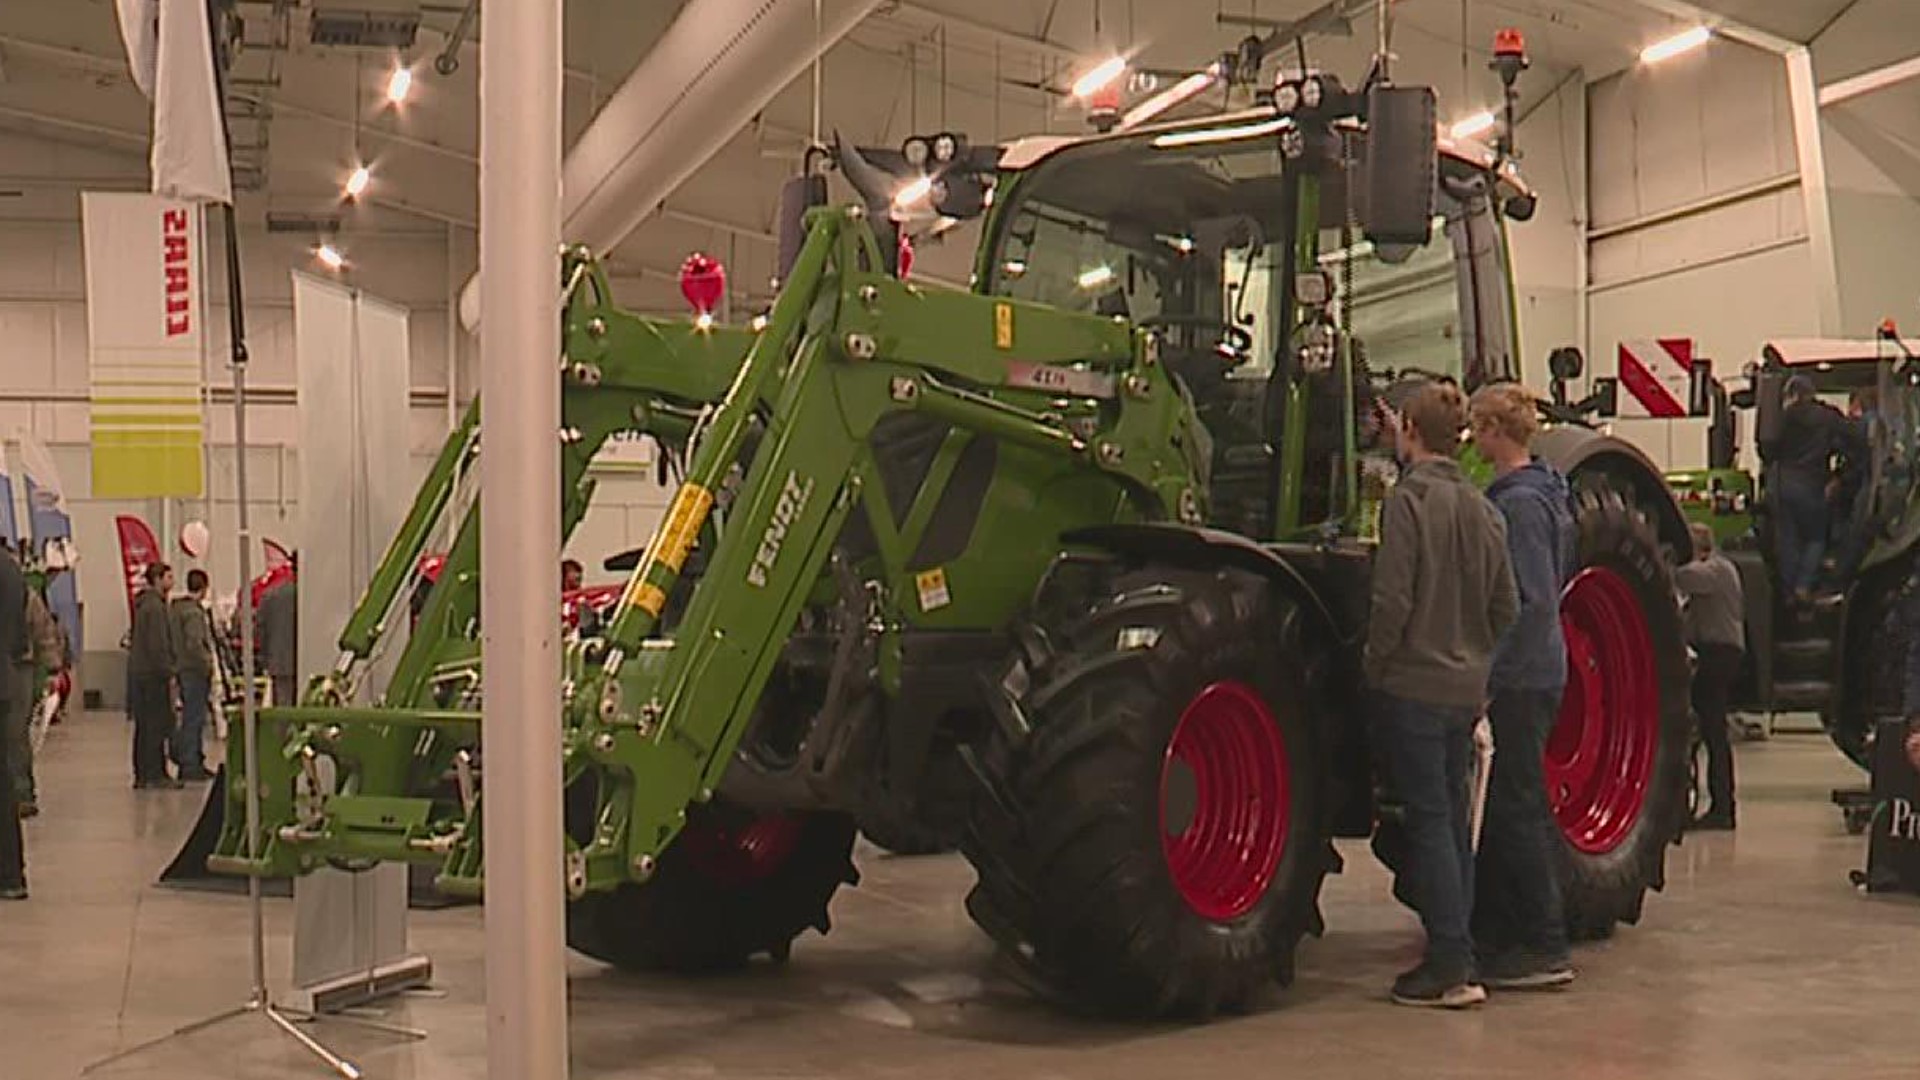 The Keystone Farm Show is the largest commercial farm equipment and service provider trade show in the commonwealth.